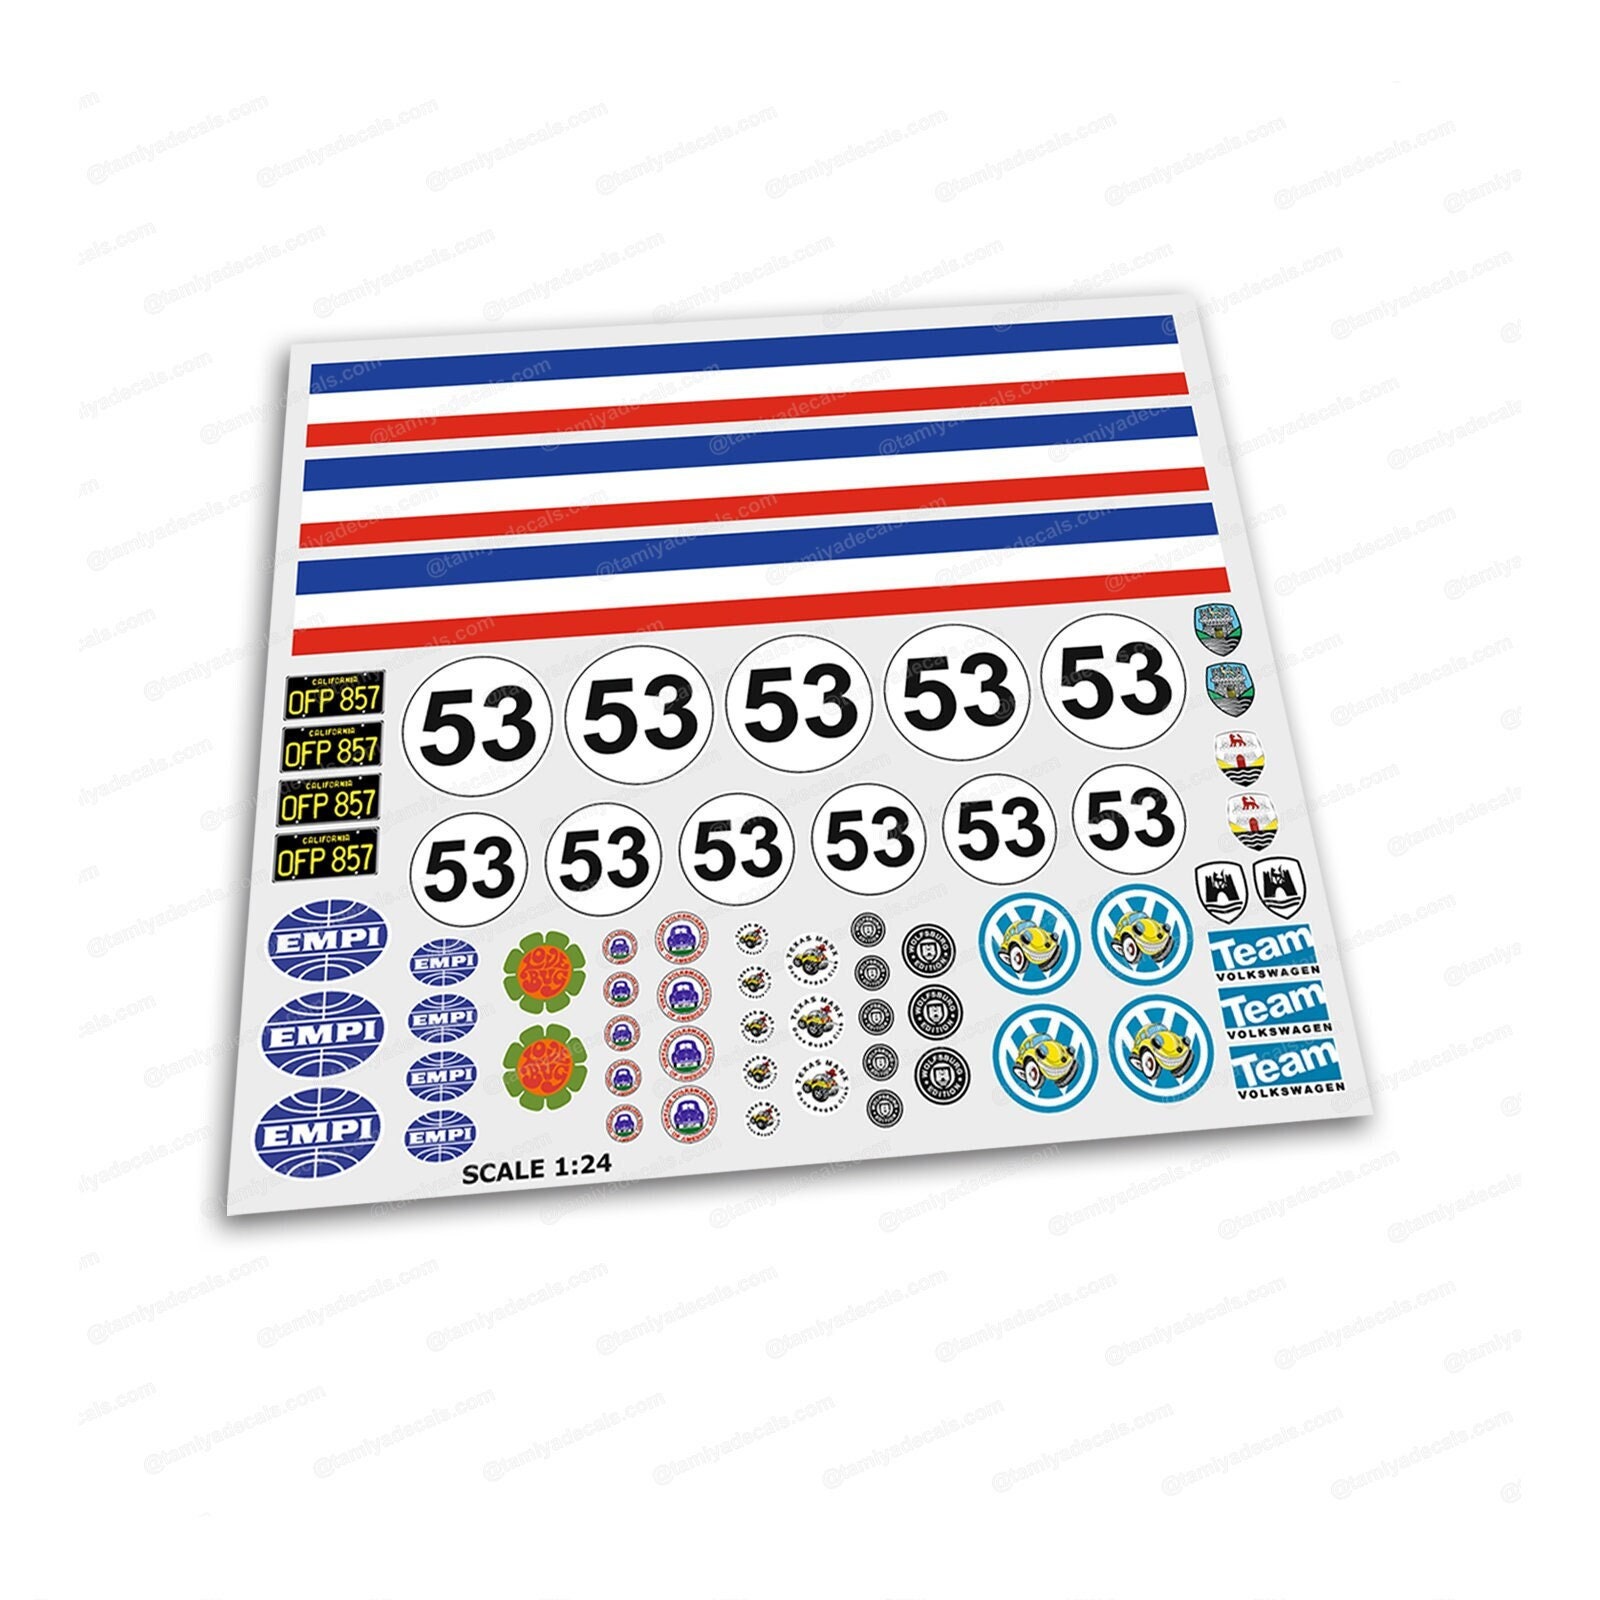 42 Clear Planner Stickers (1/2 each), Scale Planner Stickers, Write-On  Stickers, Fitness and Diet Stickers for Planners, Calendars and more